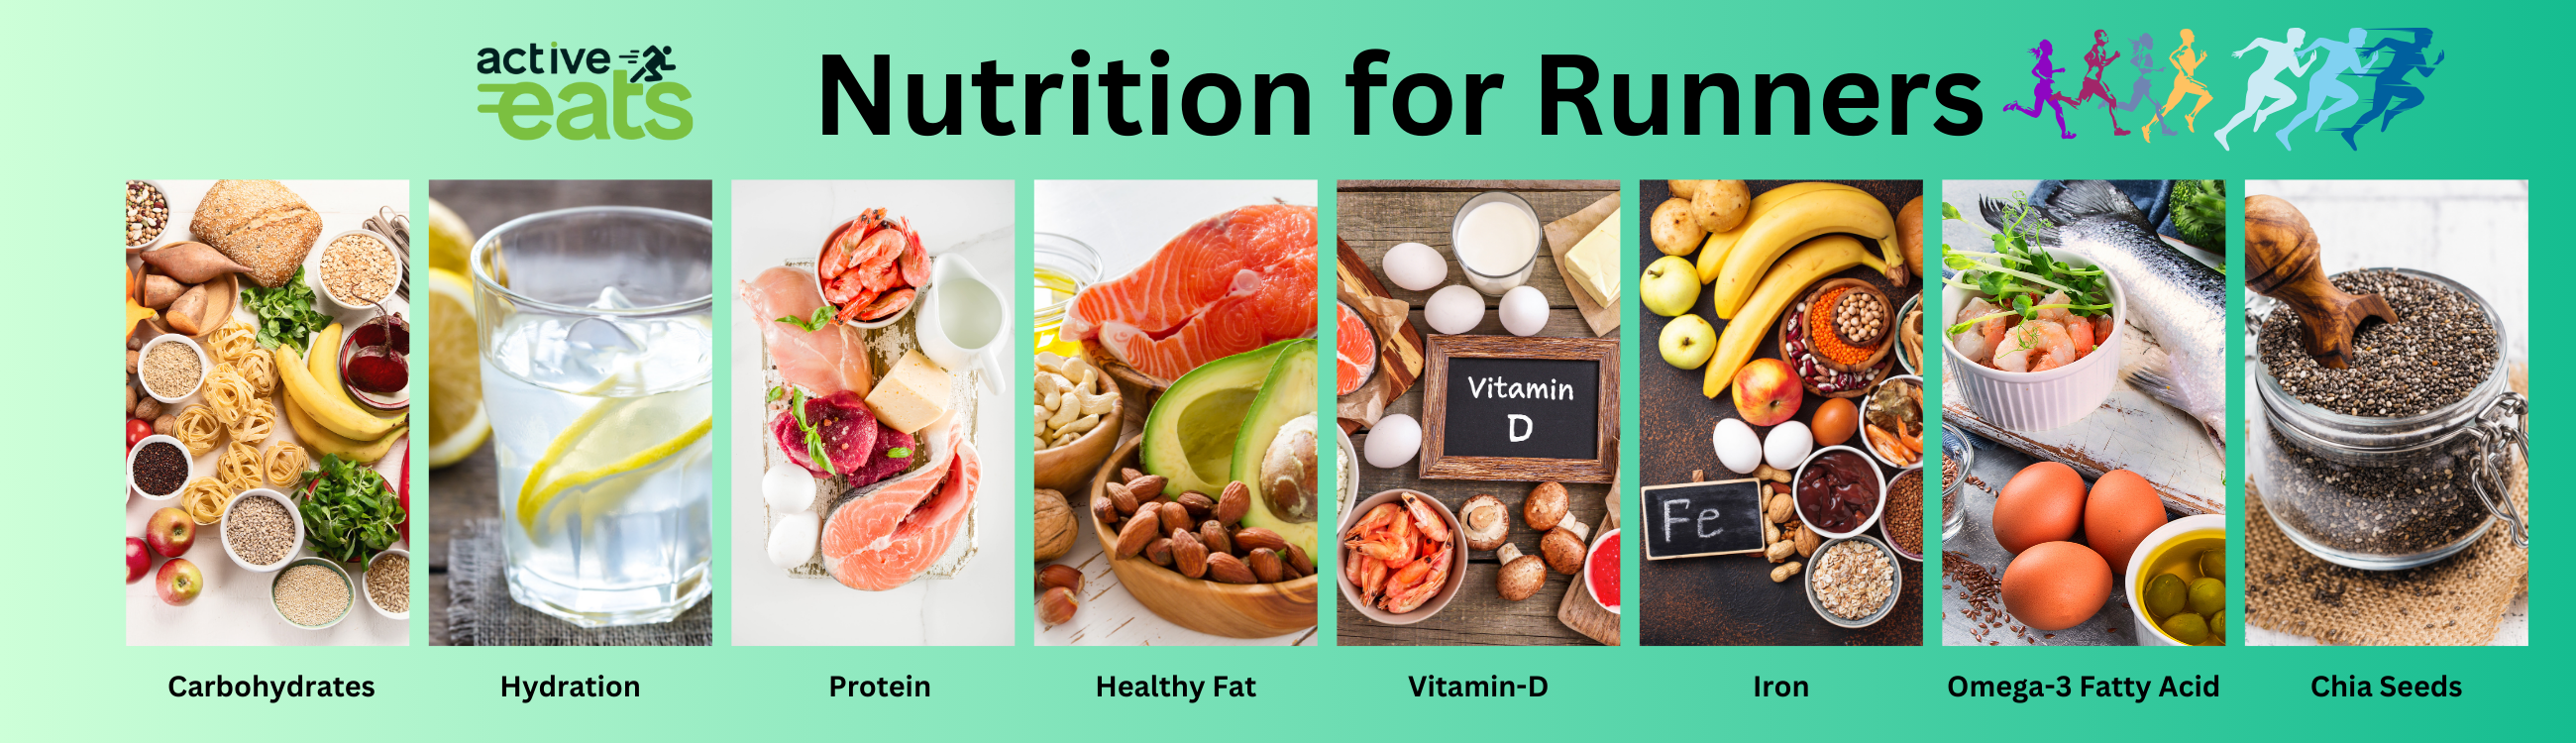 Image shows picture of various importation nutrients recommended for runner like carbohydrates, proper hydration, protein, healthy fat, vitamin-D, Iron, Omega-3 fatty acids and chia seeds